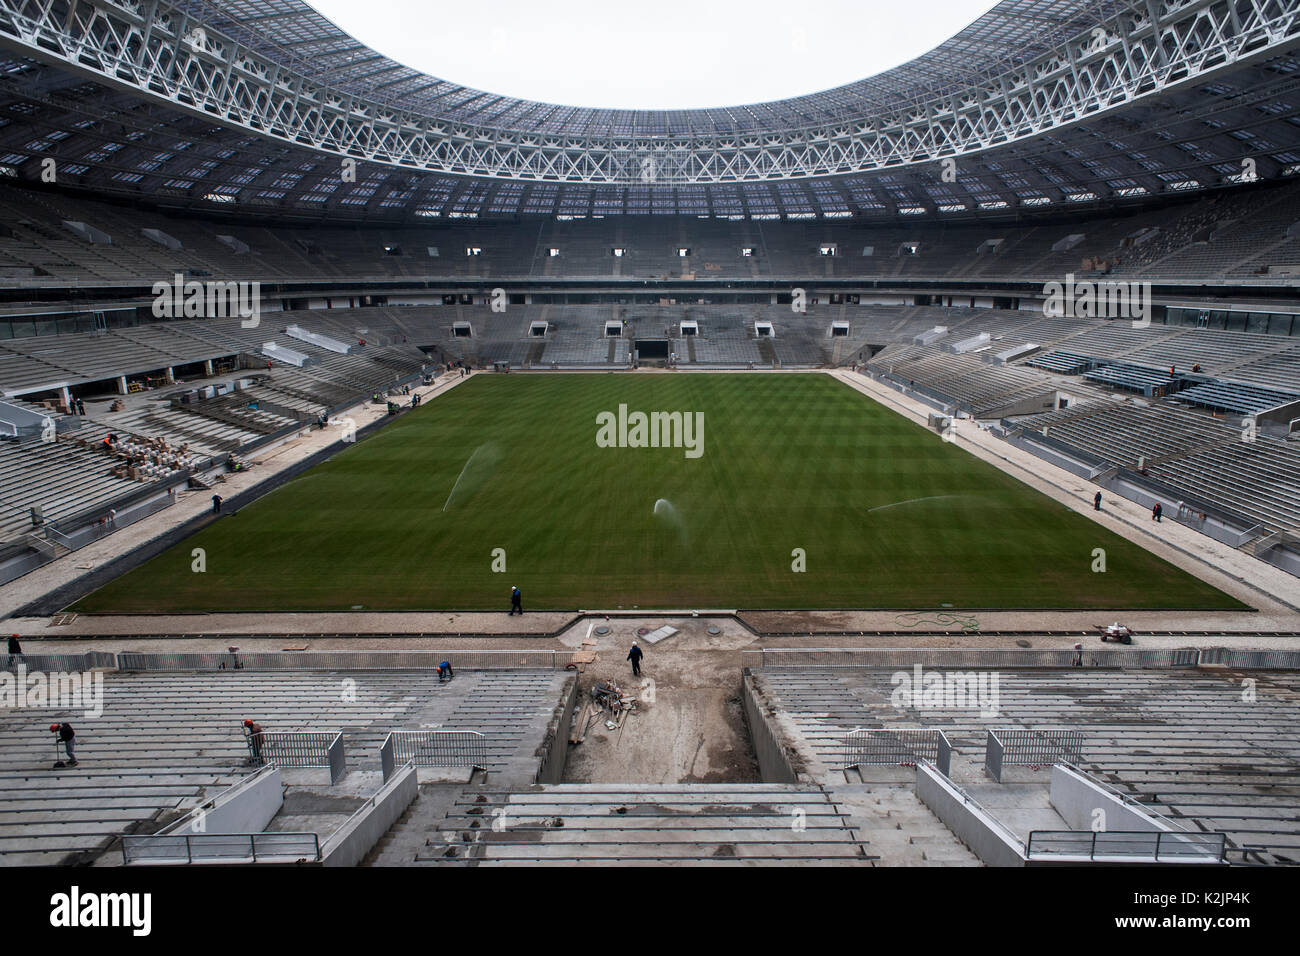 Renovation of the Luzhniki Stadium in Moscow. It will host the world cup final and has a capacity of 80 000 people. Construction and renovation of football stadiums in Russia is racing against time as Russia is set to host the FIFA 2018 World Cup during June and July 2018. Stock Photo